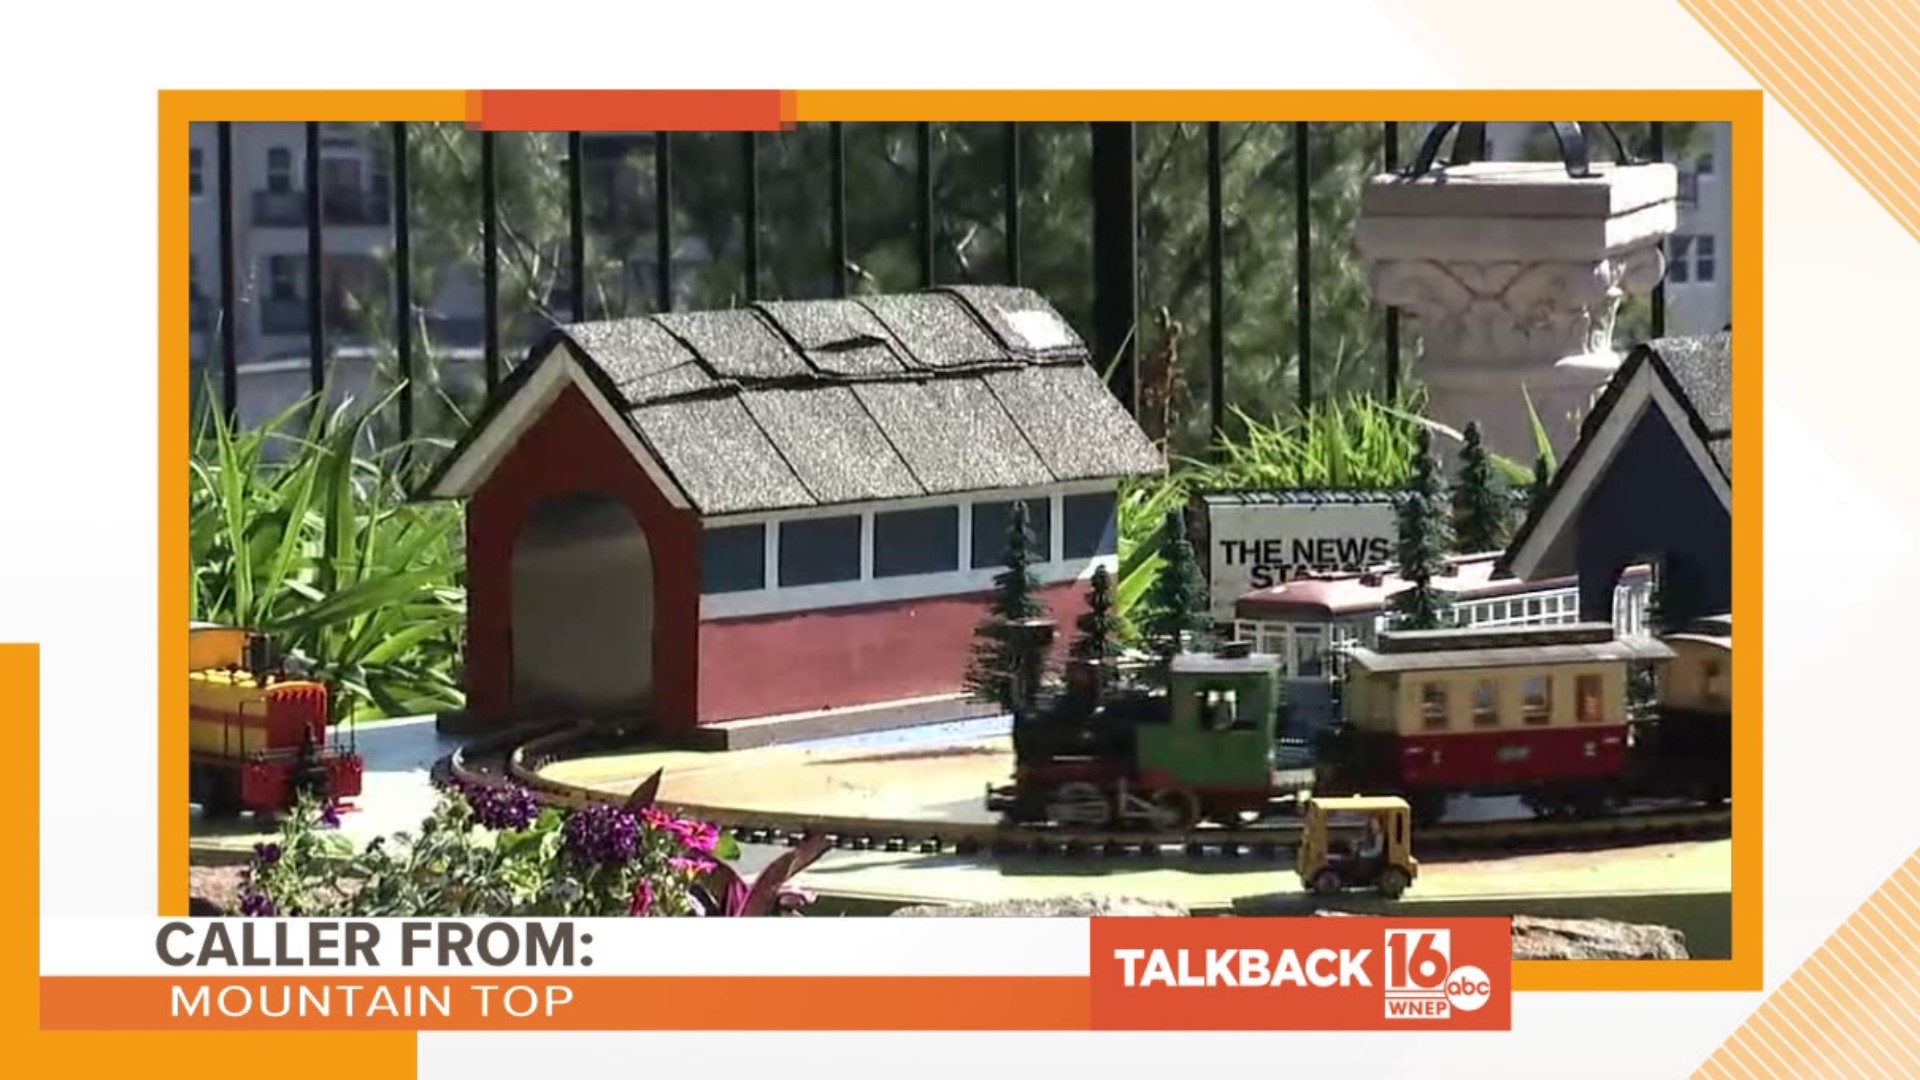 Callers are welcoming back the backyard train - but not without some critiques.